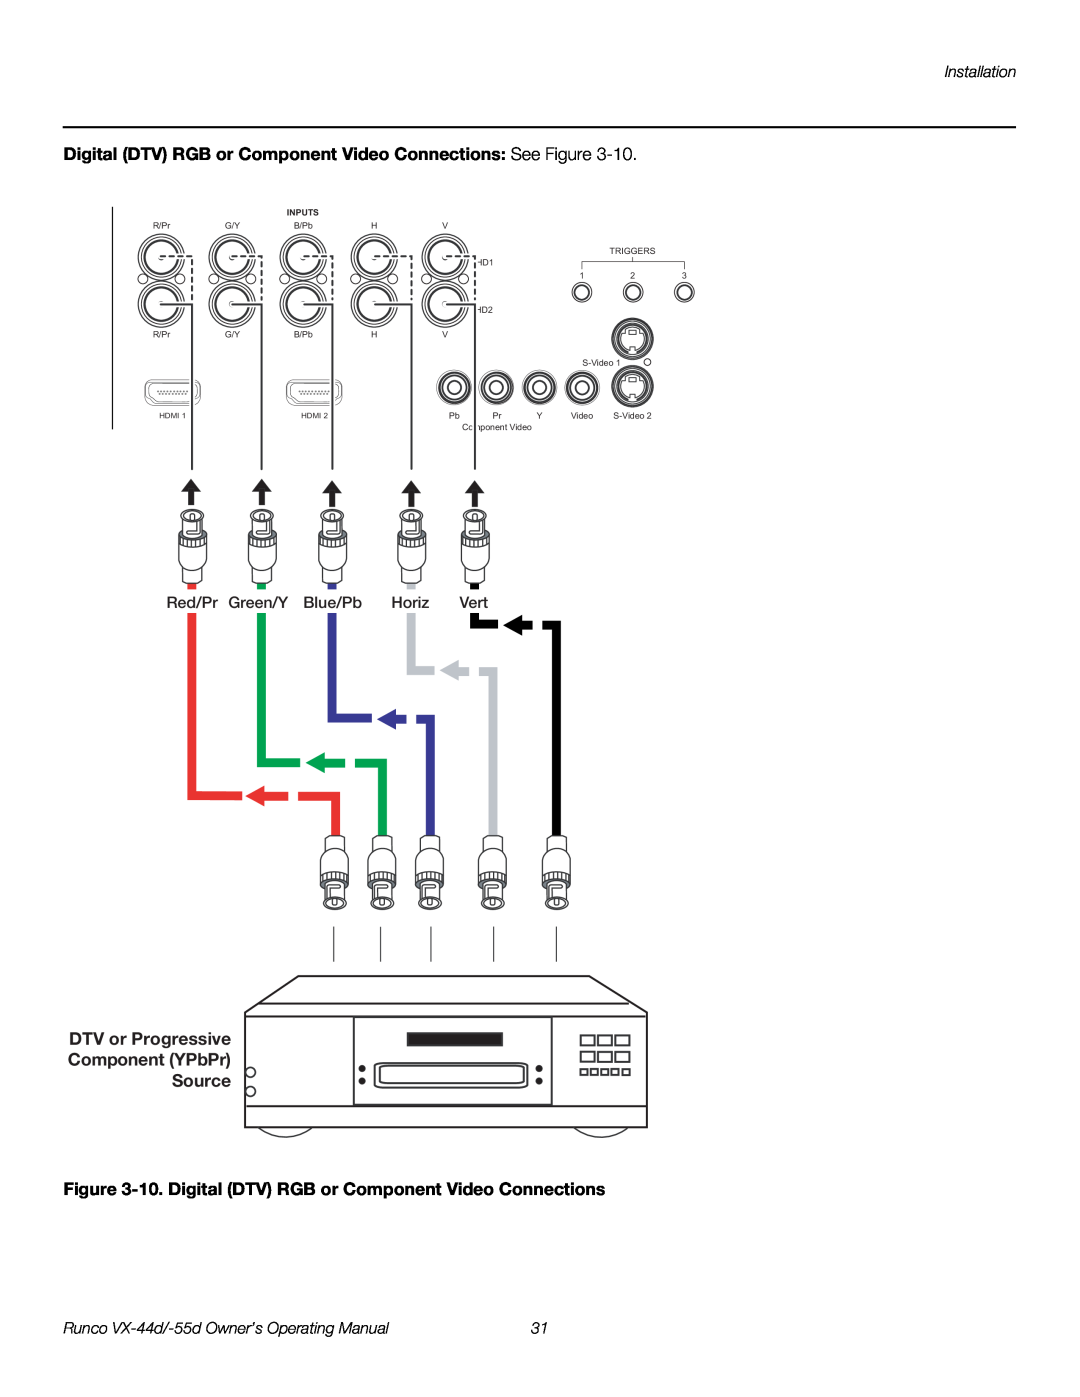 Runco 1080p manual Digital DTV RGB or Component Video Connections See Figure, DTV or Progressive Component YPbPr Source 